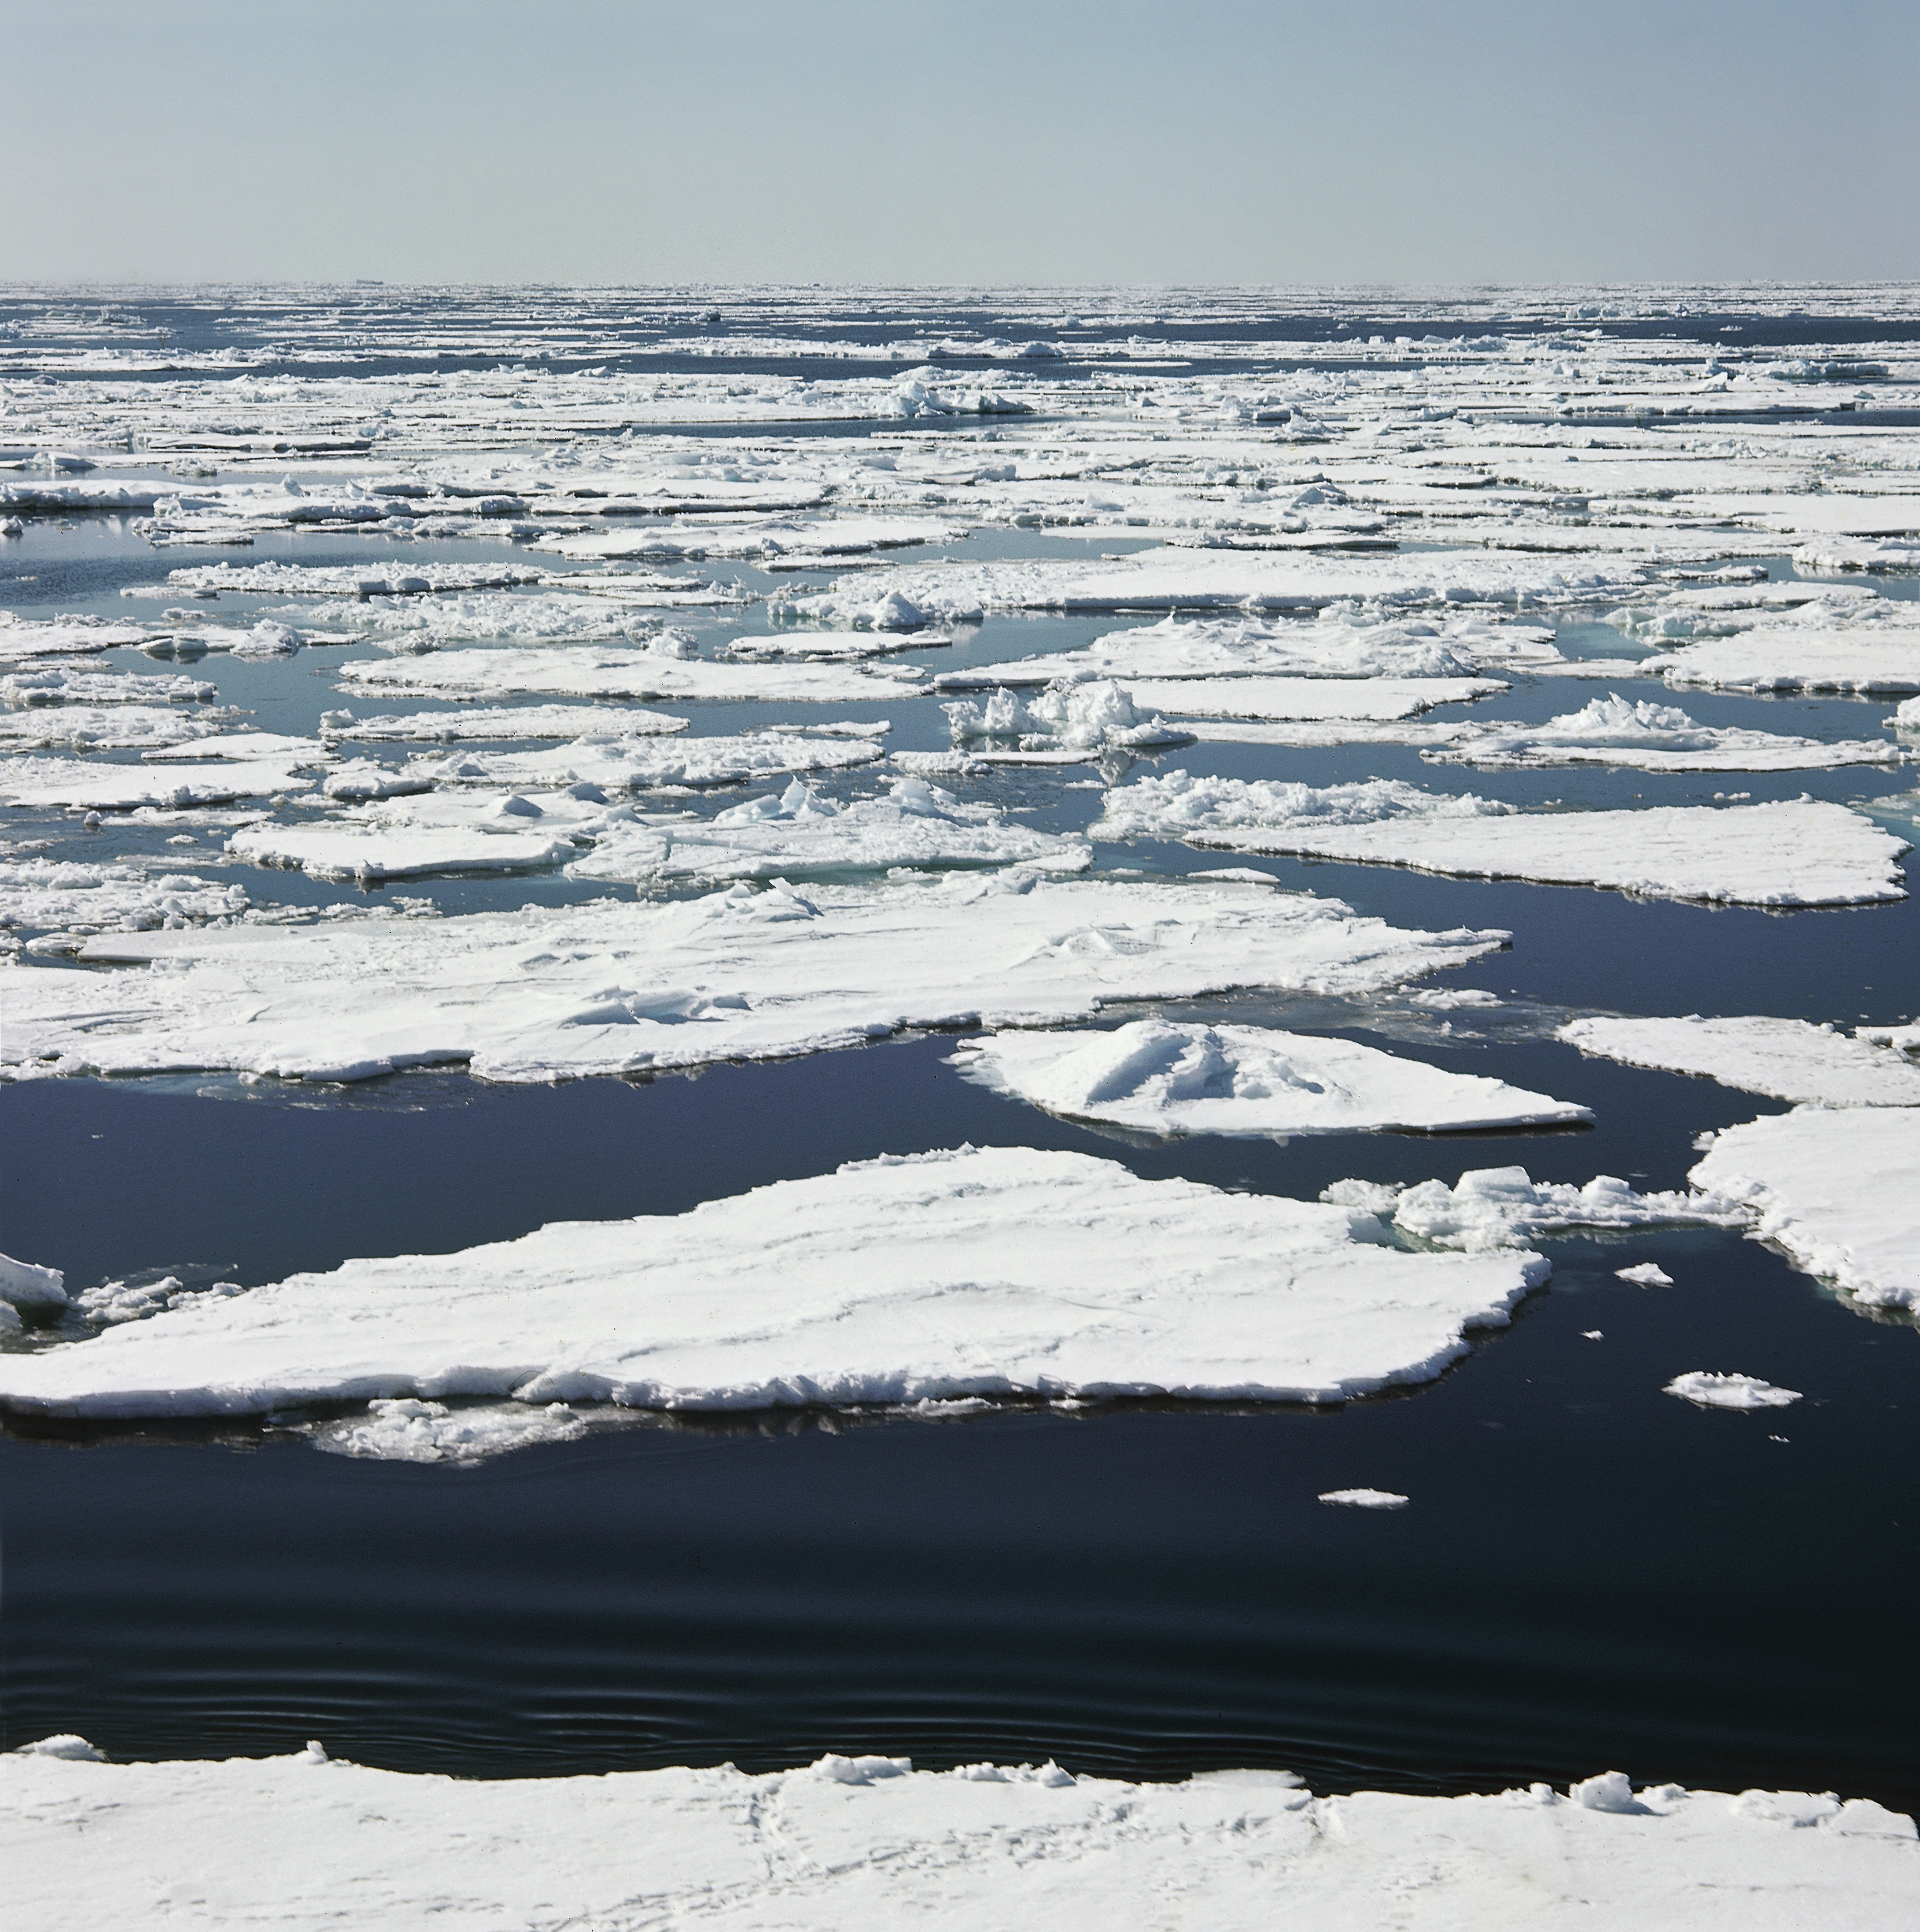 Ice floes floating on water